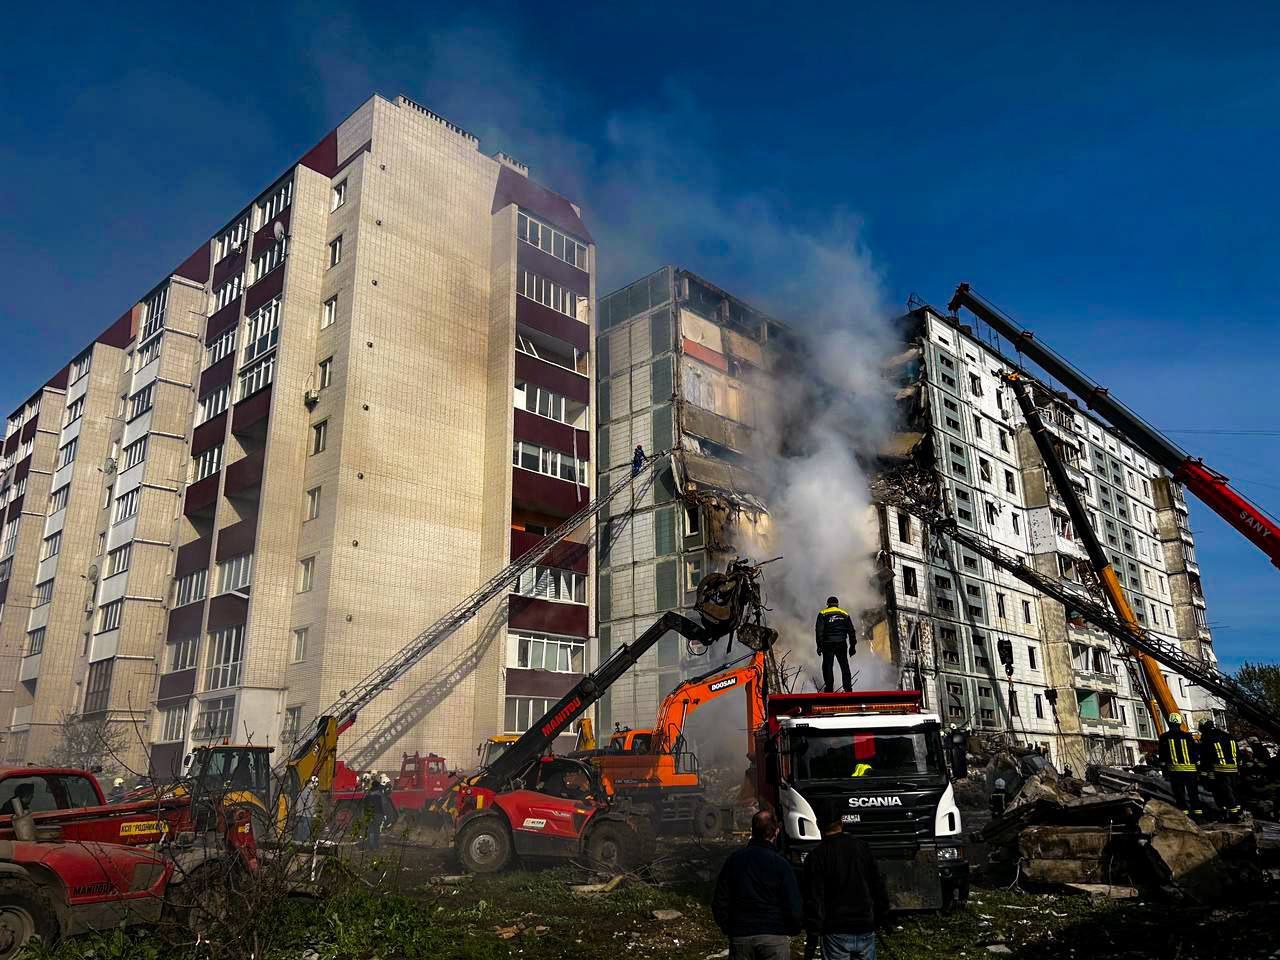 the National Police reported 4 dead and 17 wounded as a result of a russian missile attack on a house in Uman, Another Massive Missile Attack on Ukraine Was Launched by russians - AFU Shot Down More Than 90 % of the Missiles, Defense Express